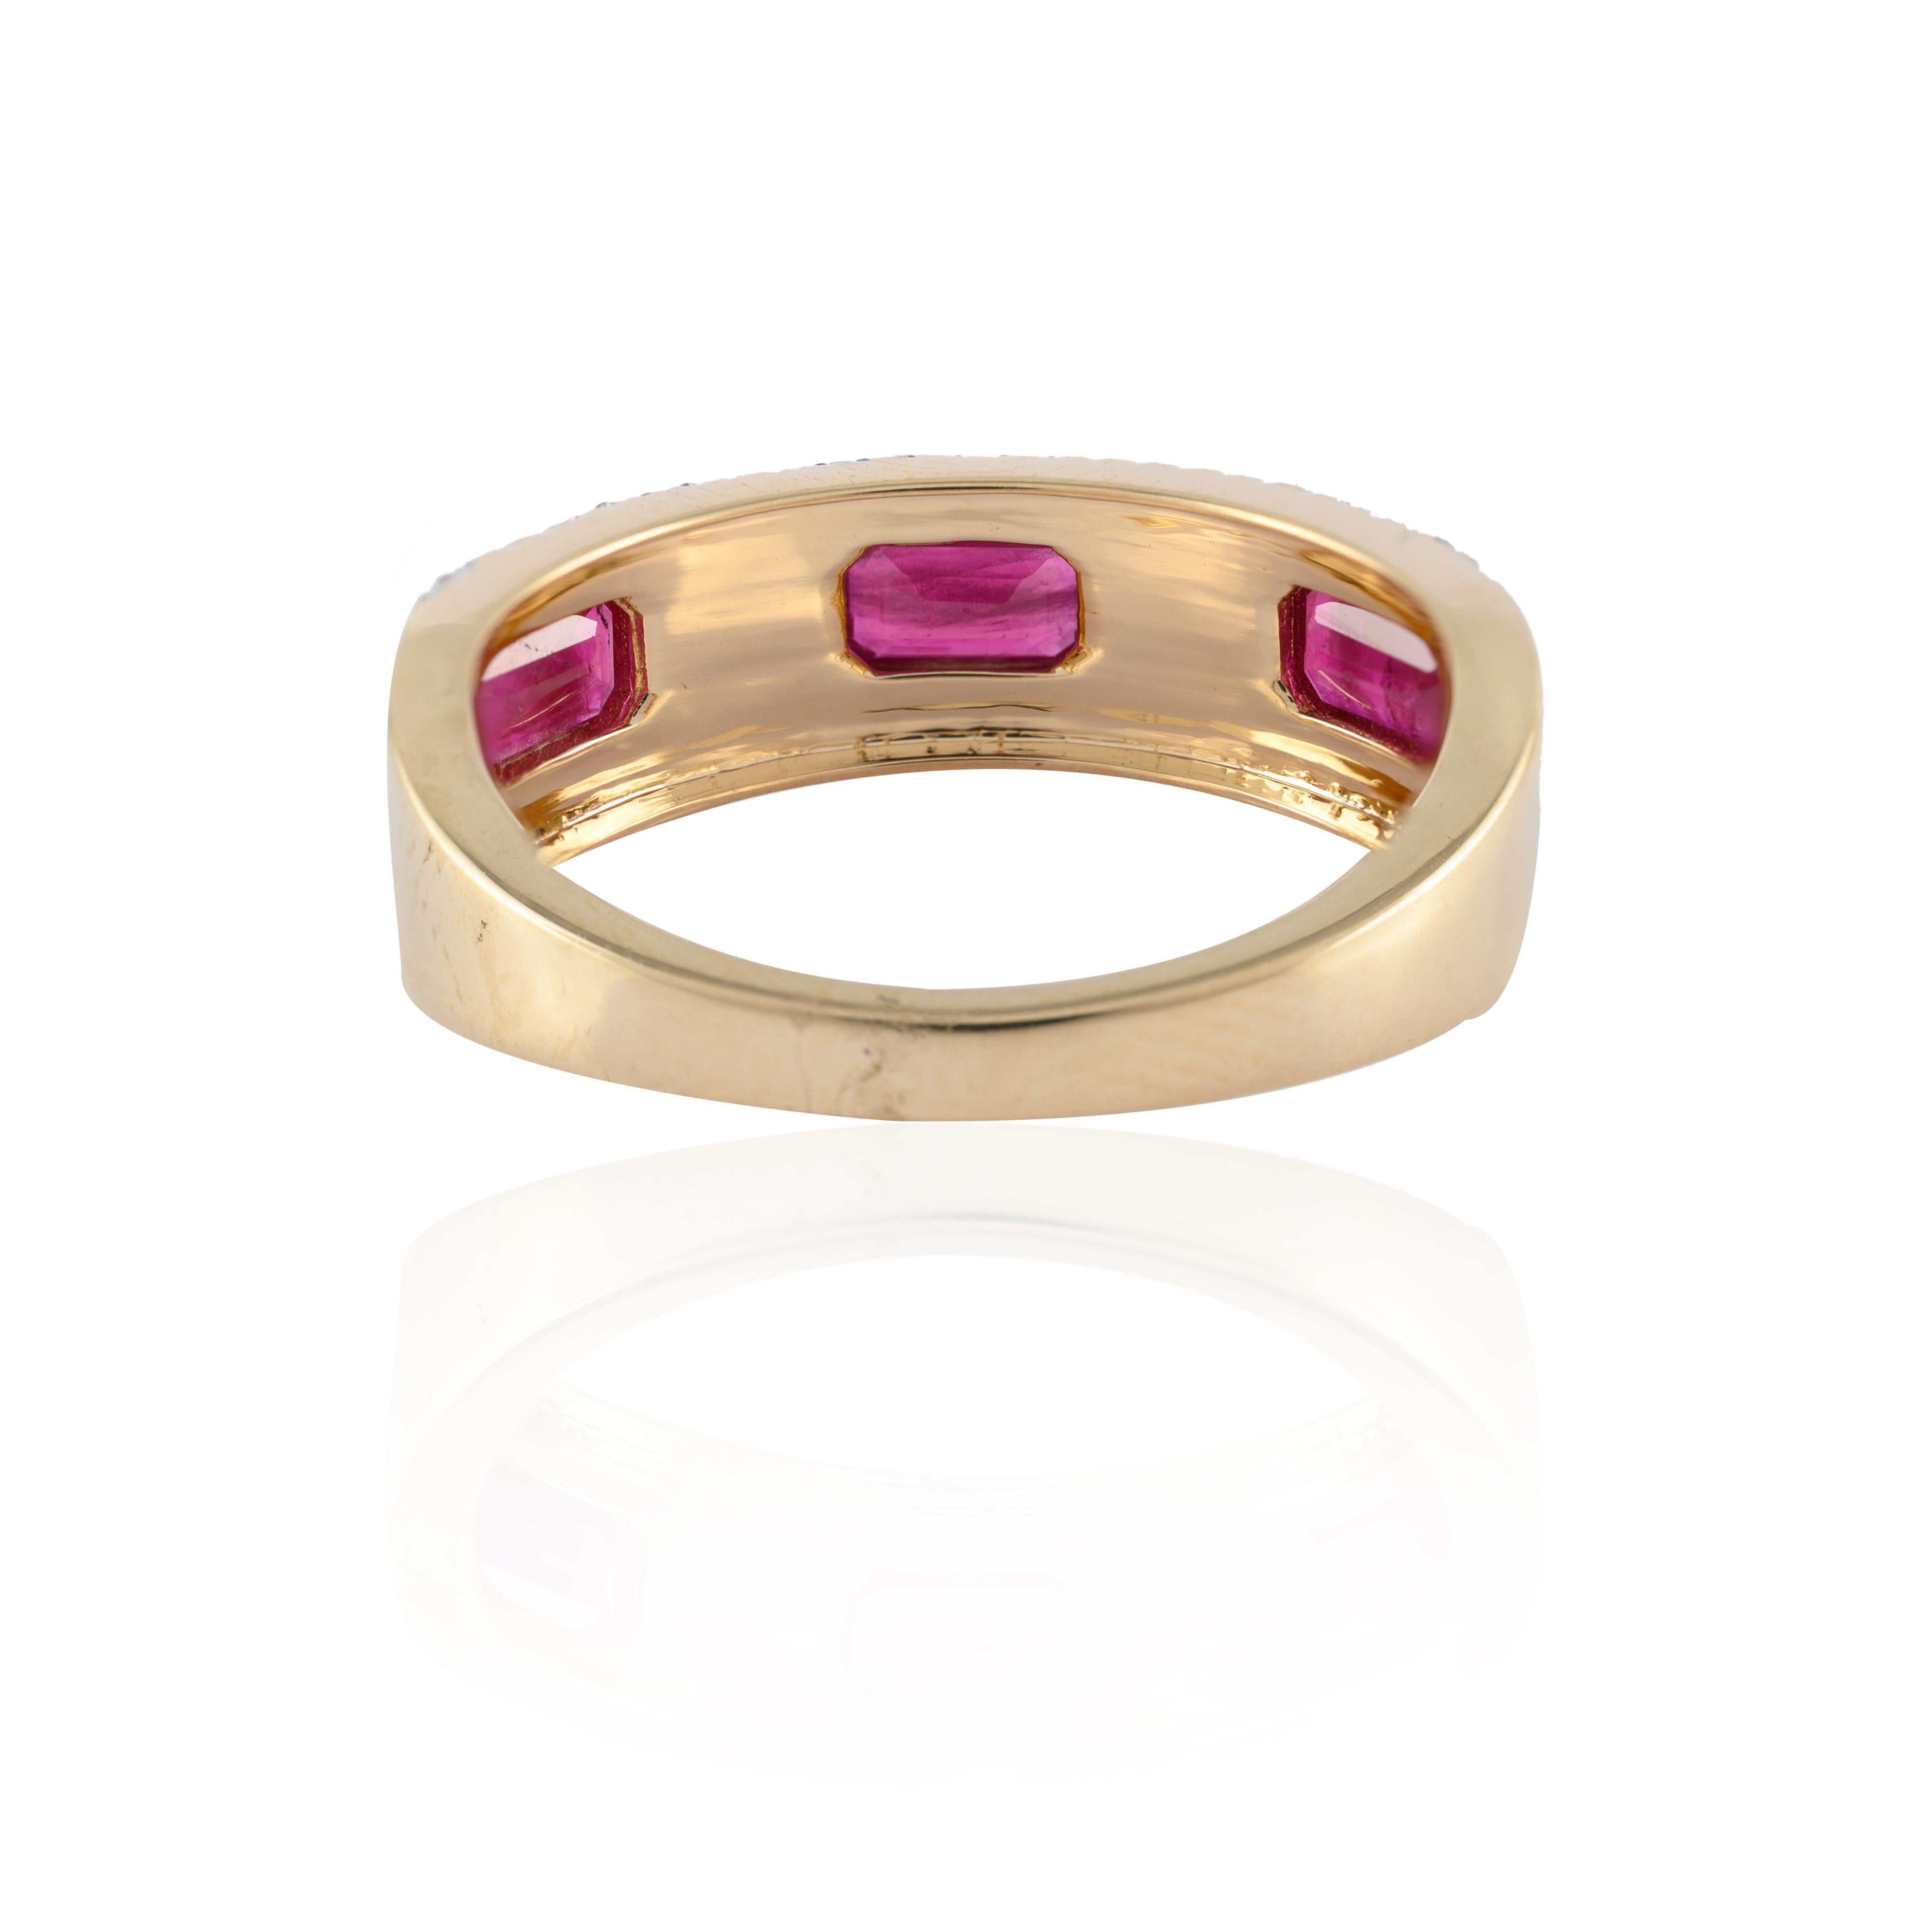 For Sale:  Statement Diamond and Ruby Wedding Ring Studded in 14k Solid Yellow Gold 4